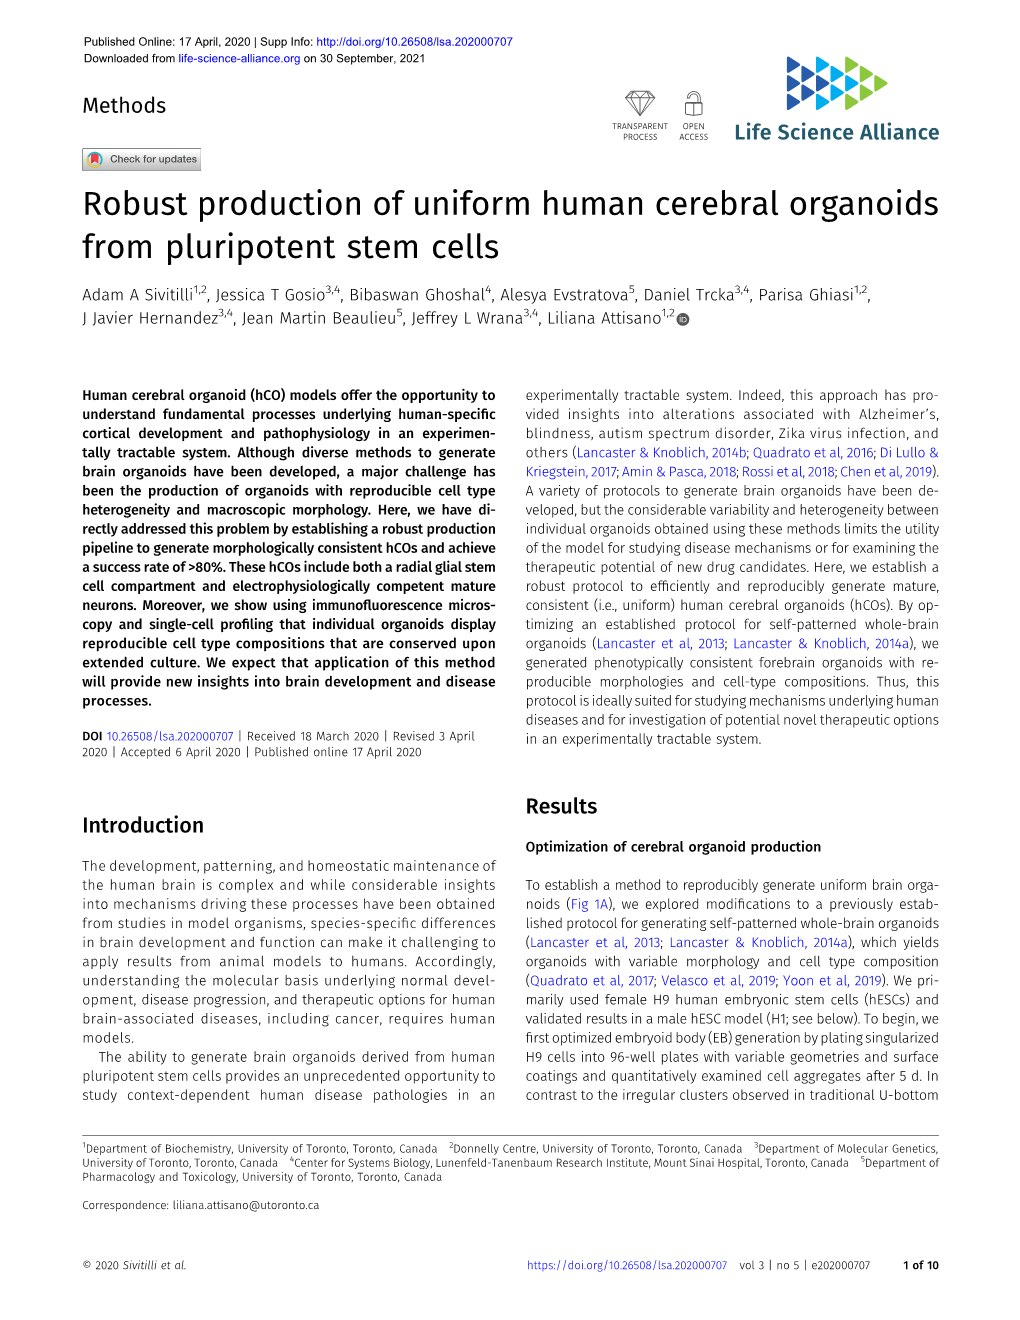 Robust Production of Uniform Human Cerebral Organoids from Pluripotent Stem Cells